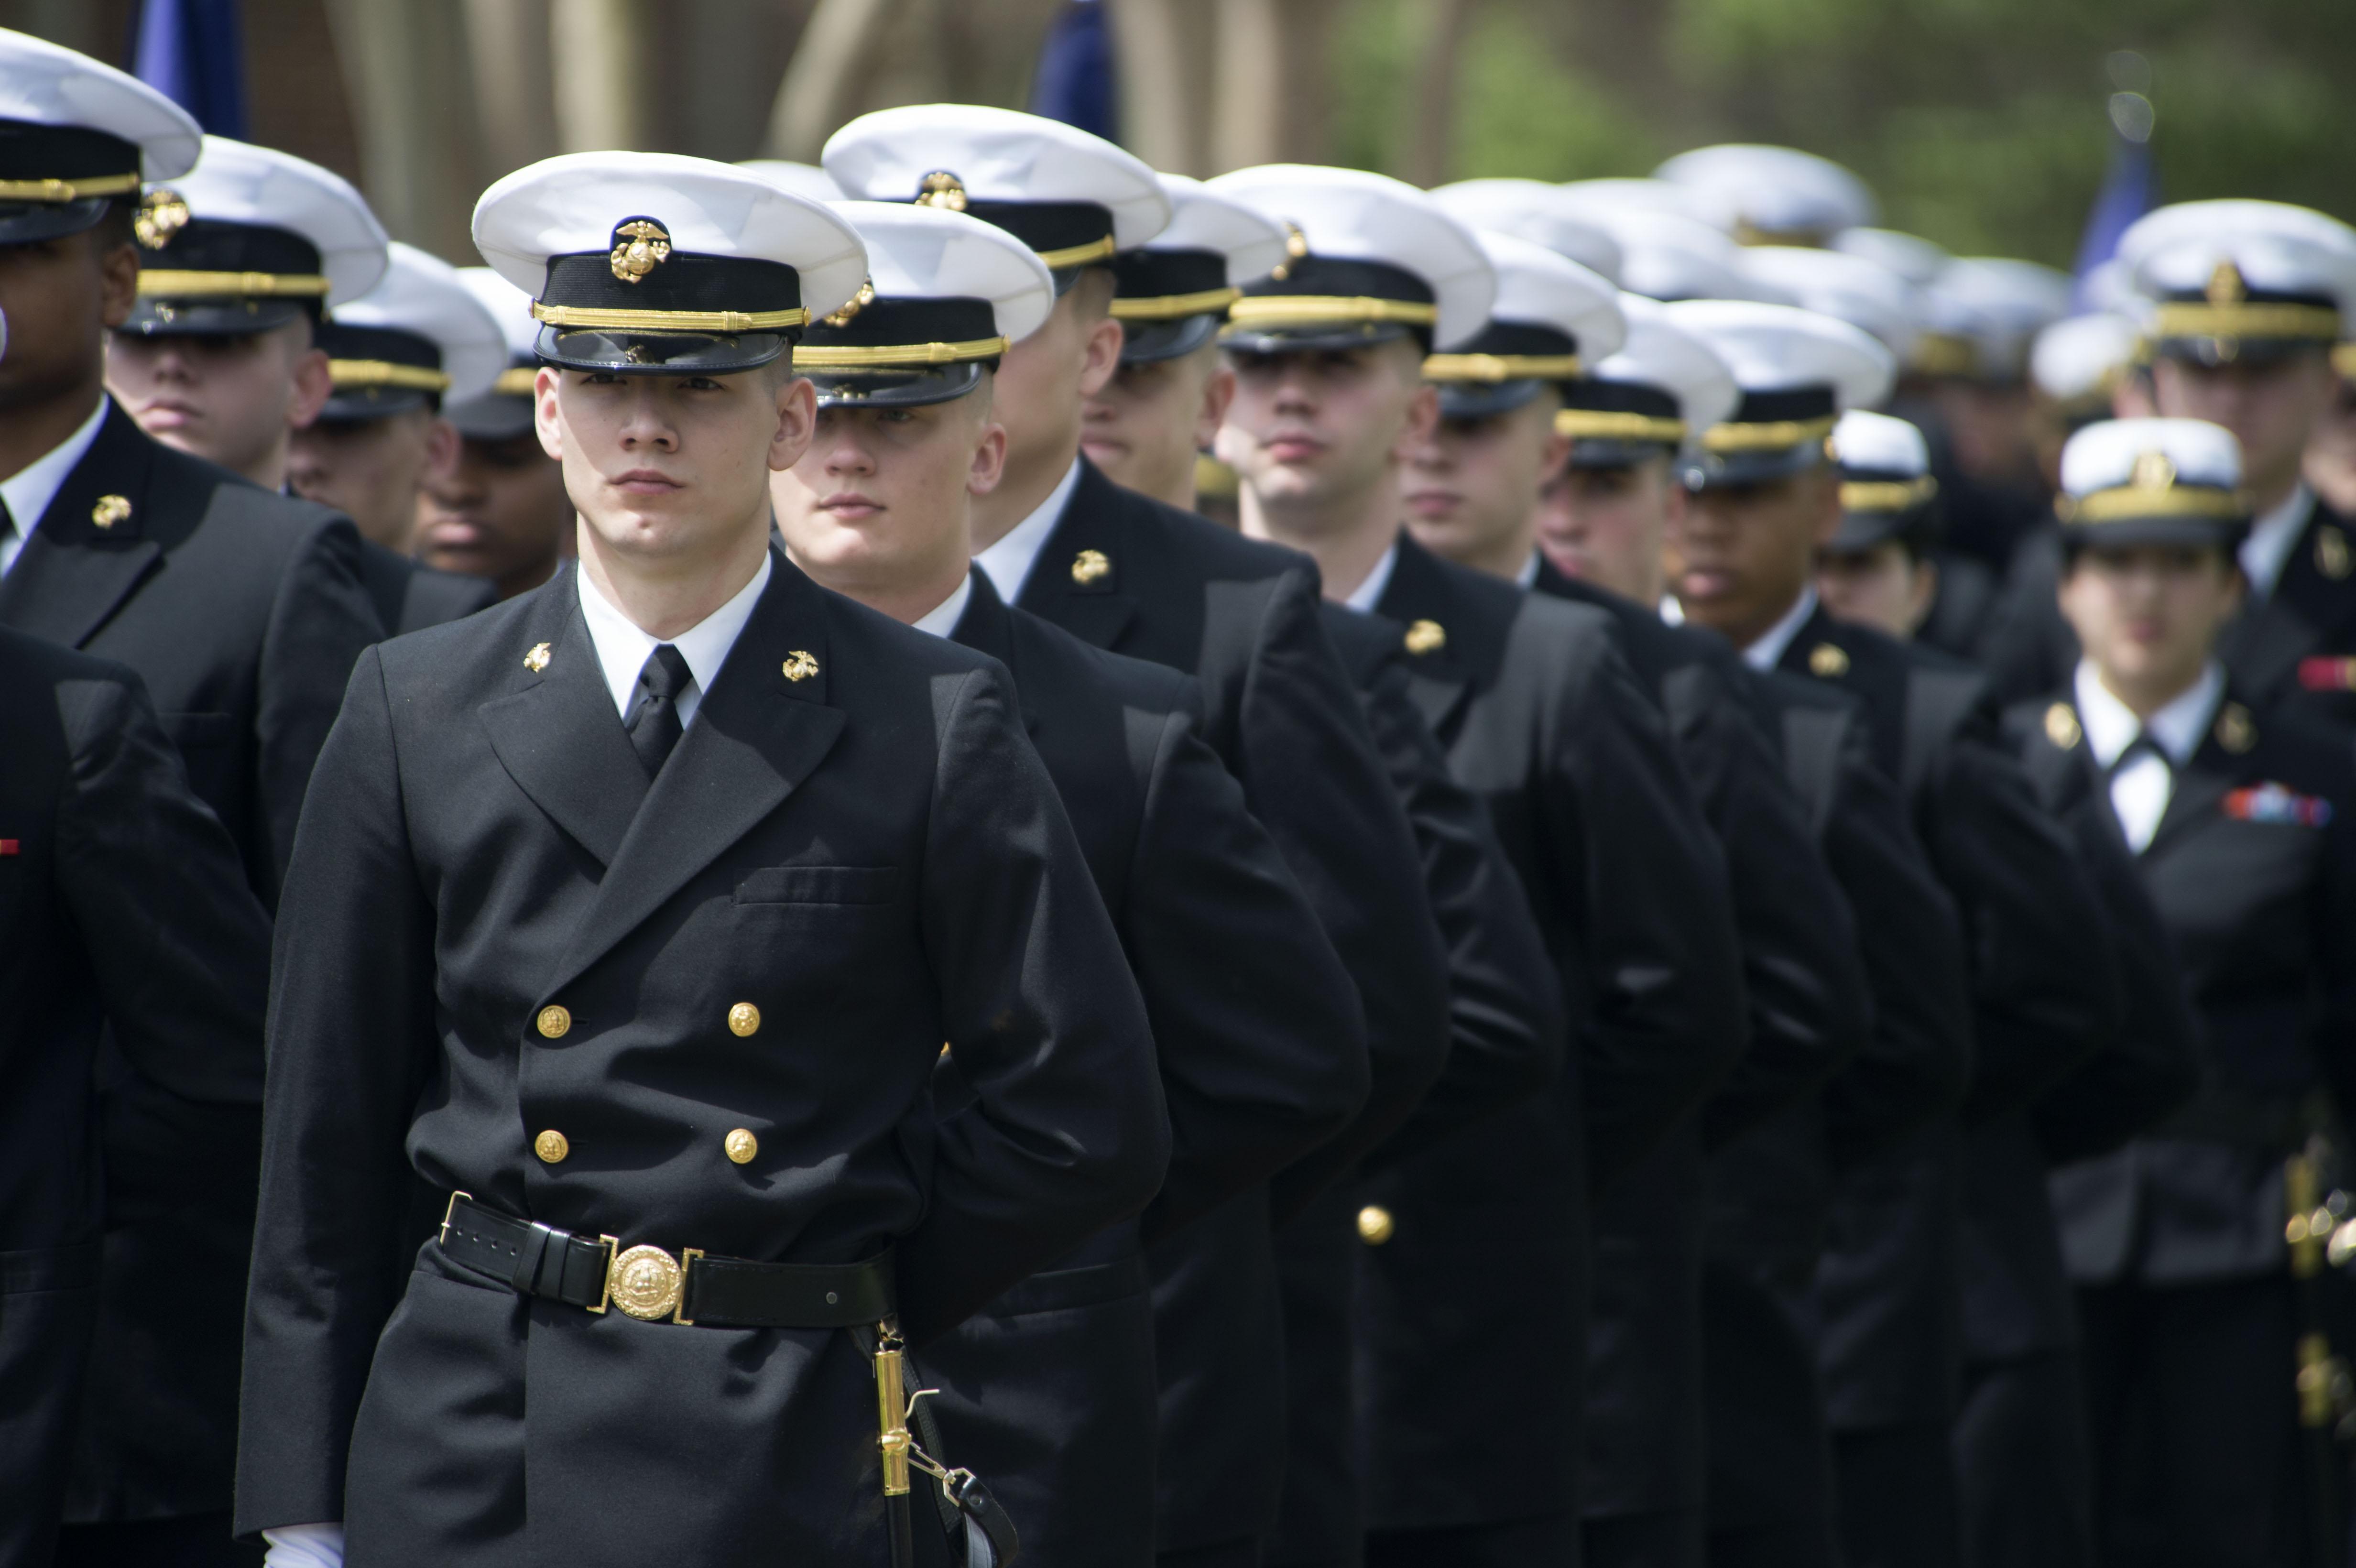 crowd of cadets in dress uniforms